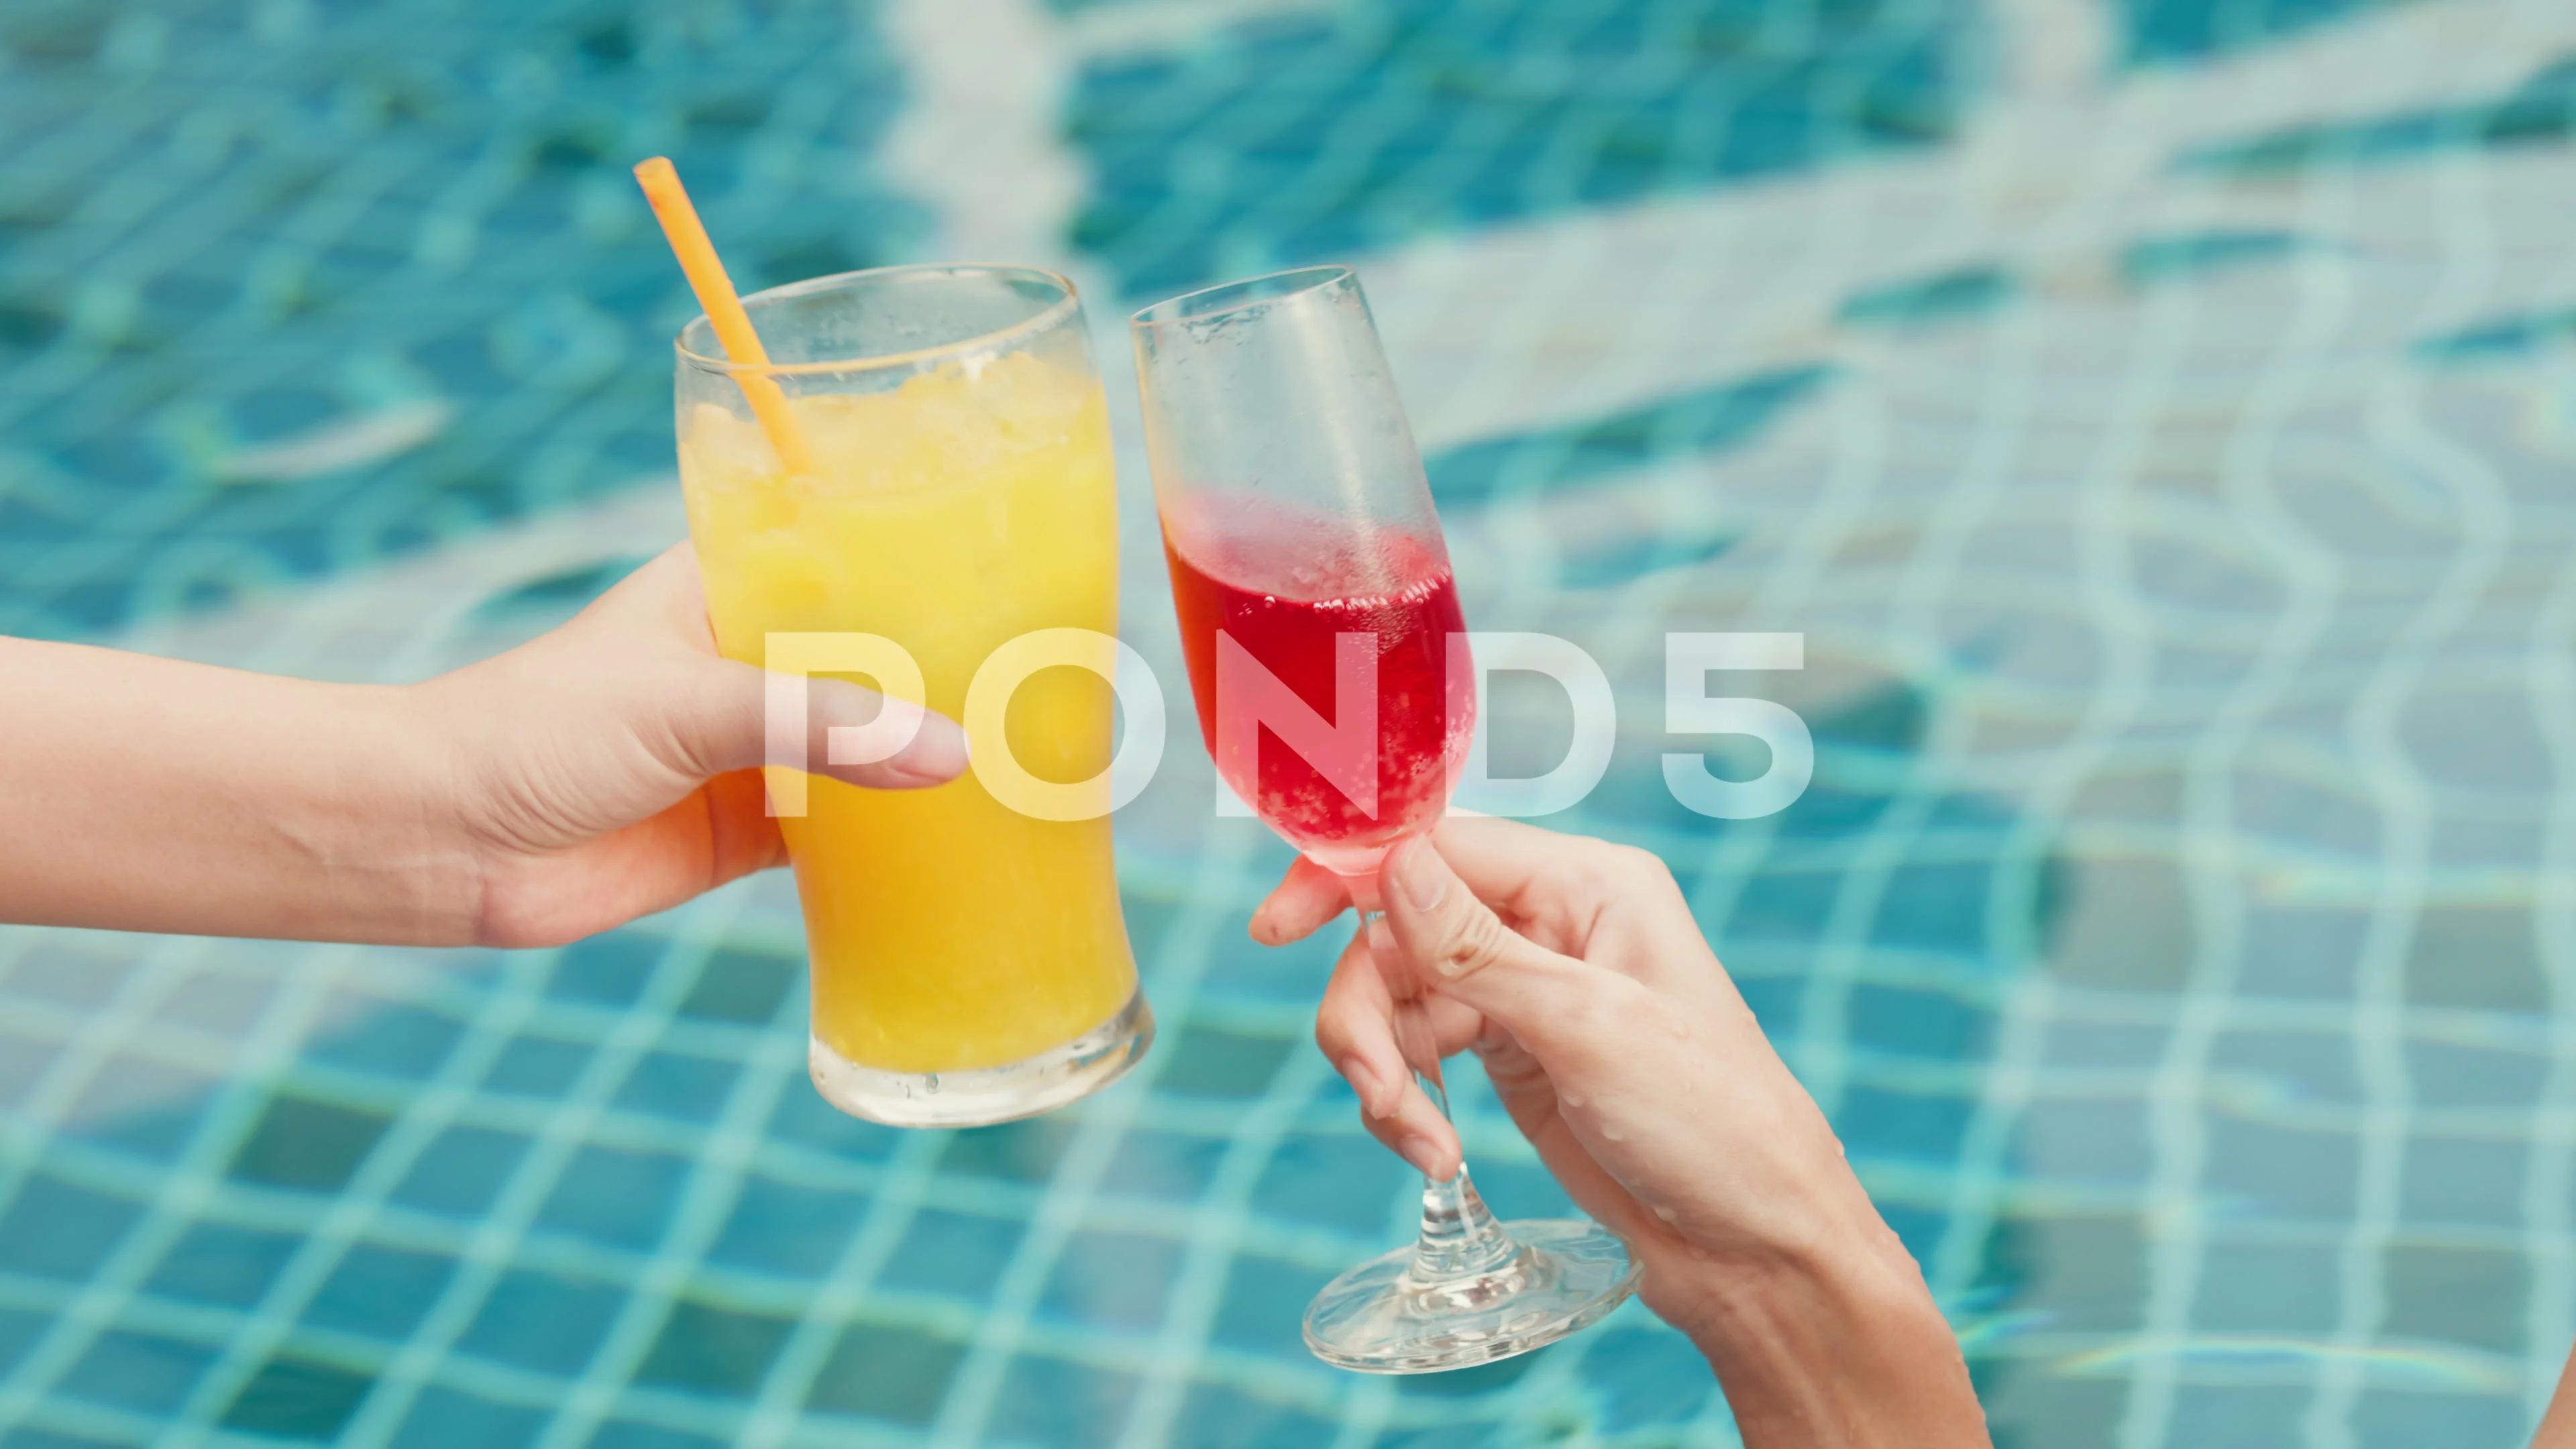 Pool Party Girls Stock Video Footage Royalty Free Pool Party Girls Videos Pond5 picture